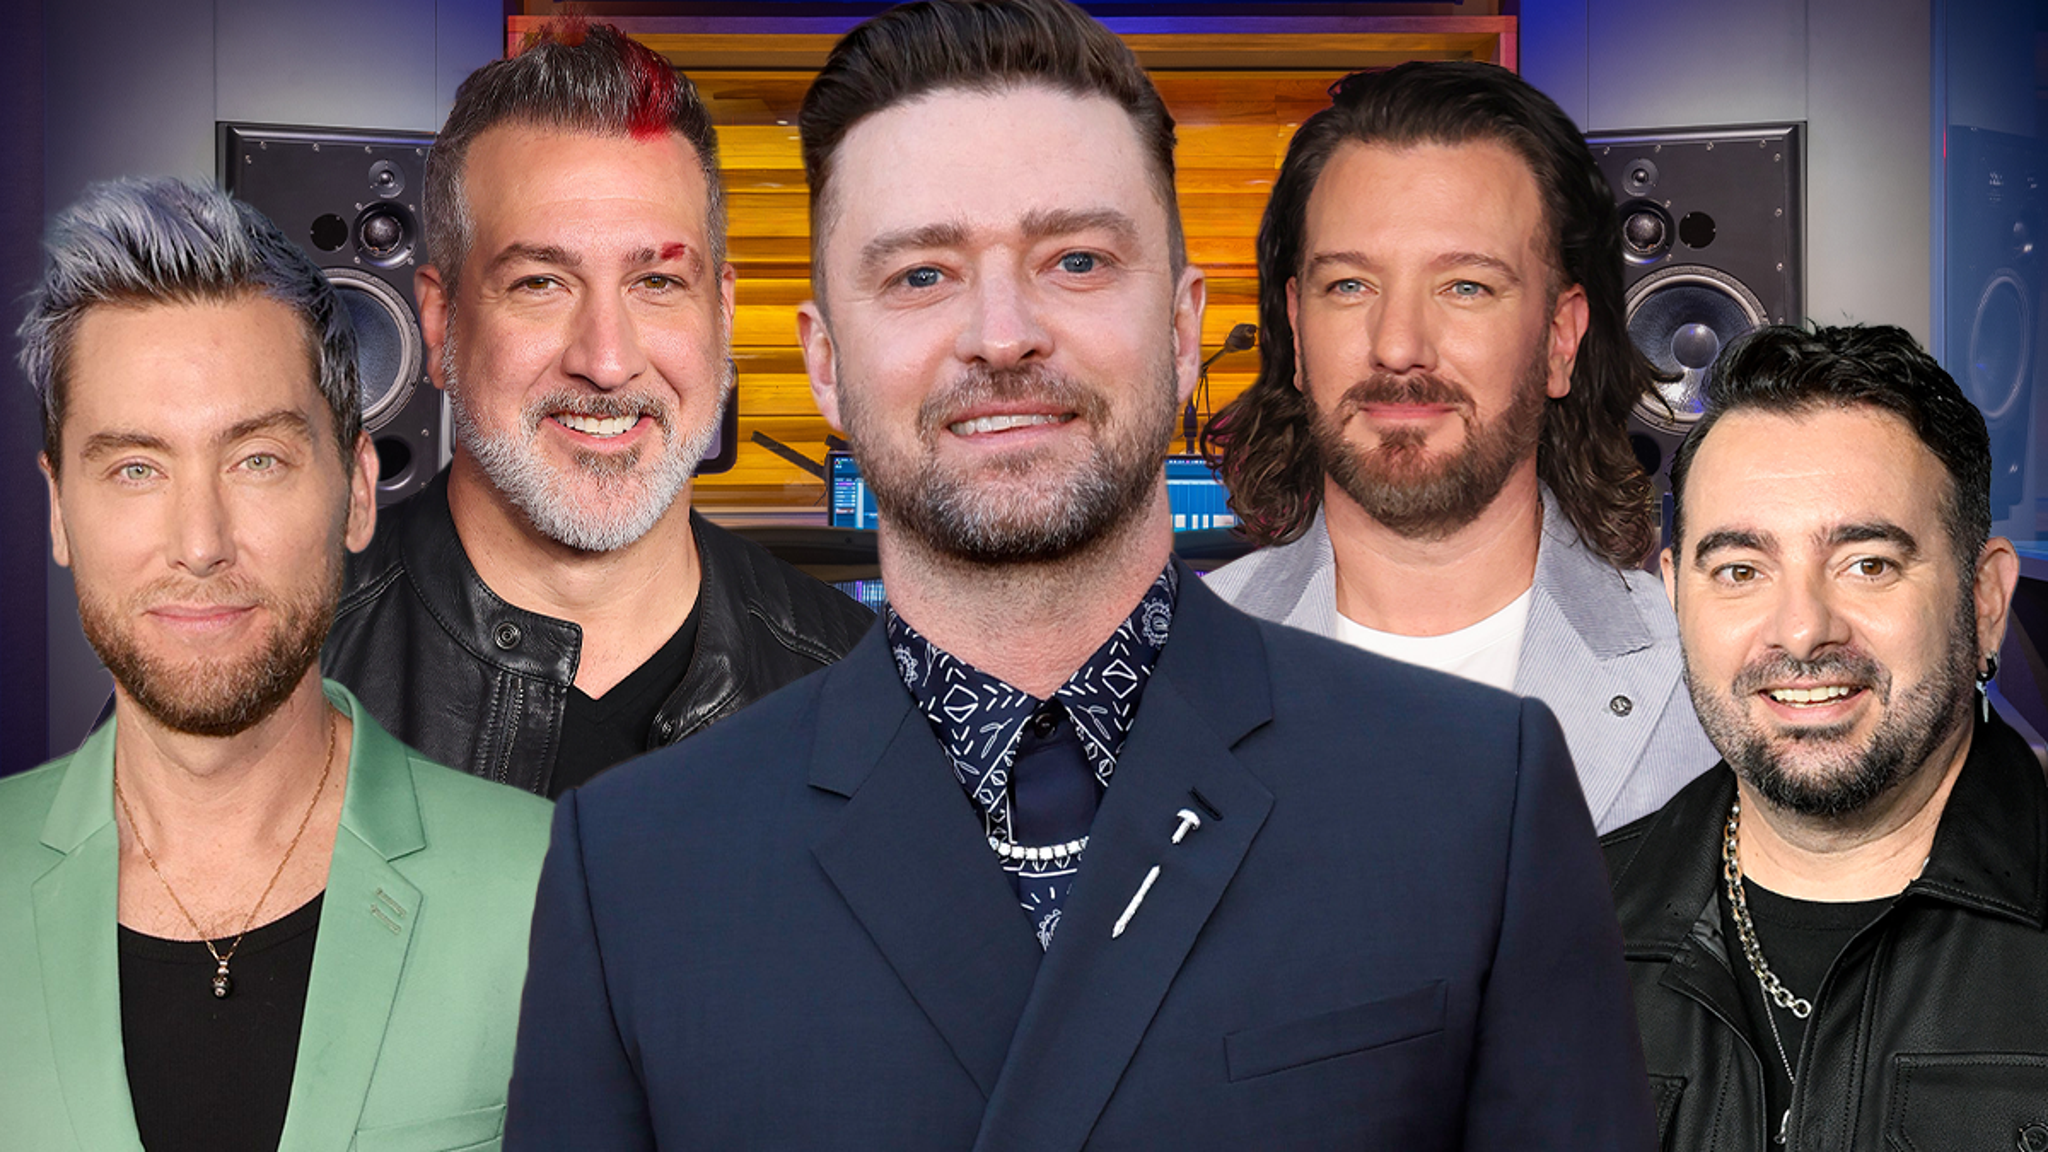 *NSYNC Doesn’t Have New Music Despite Justin Timberlake Teaser